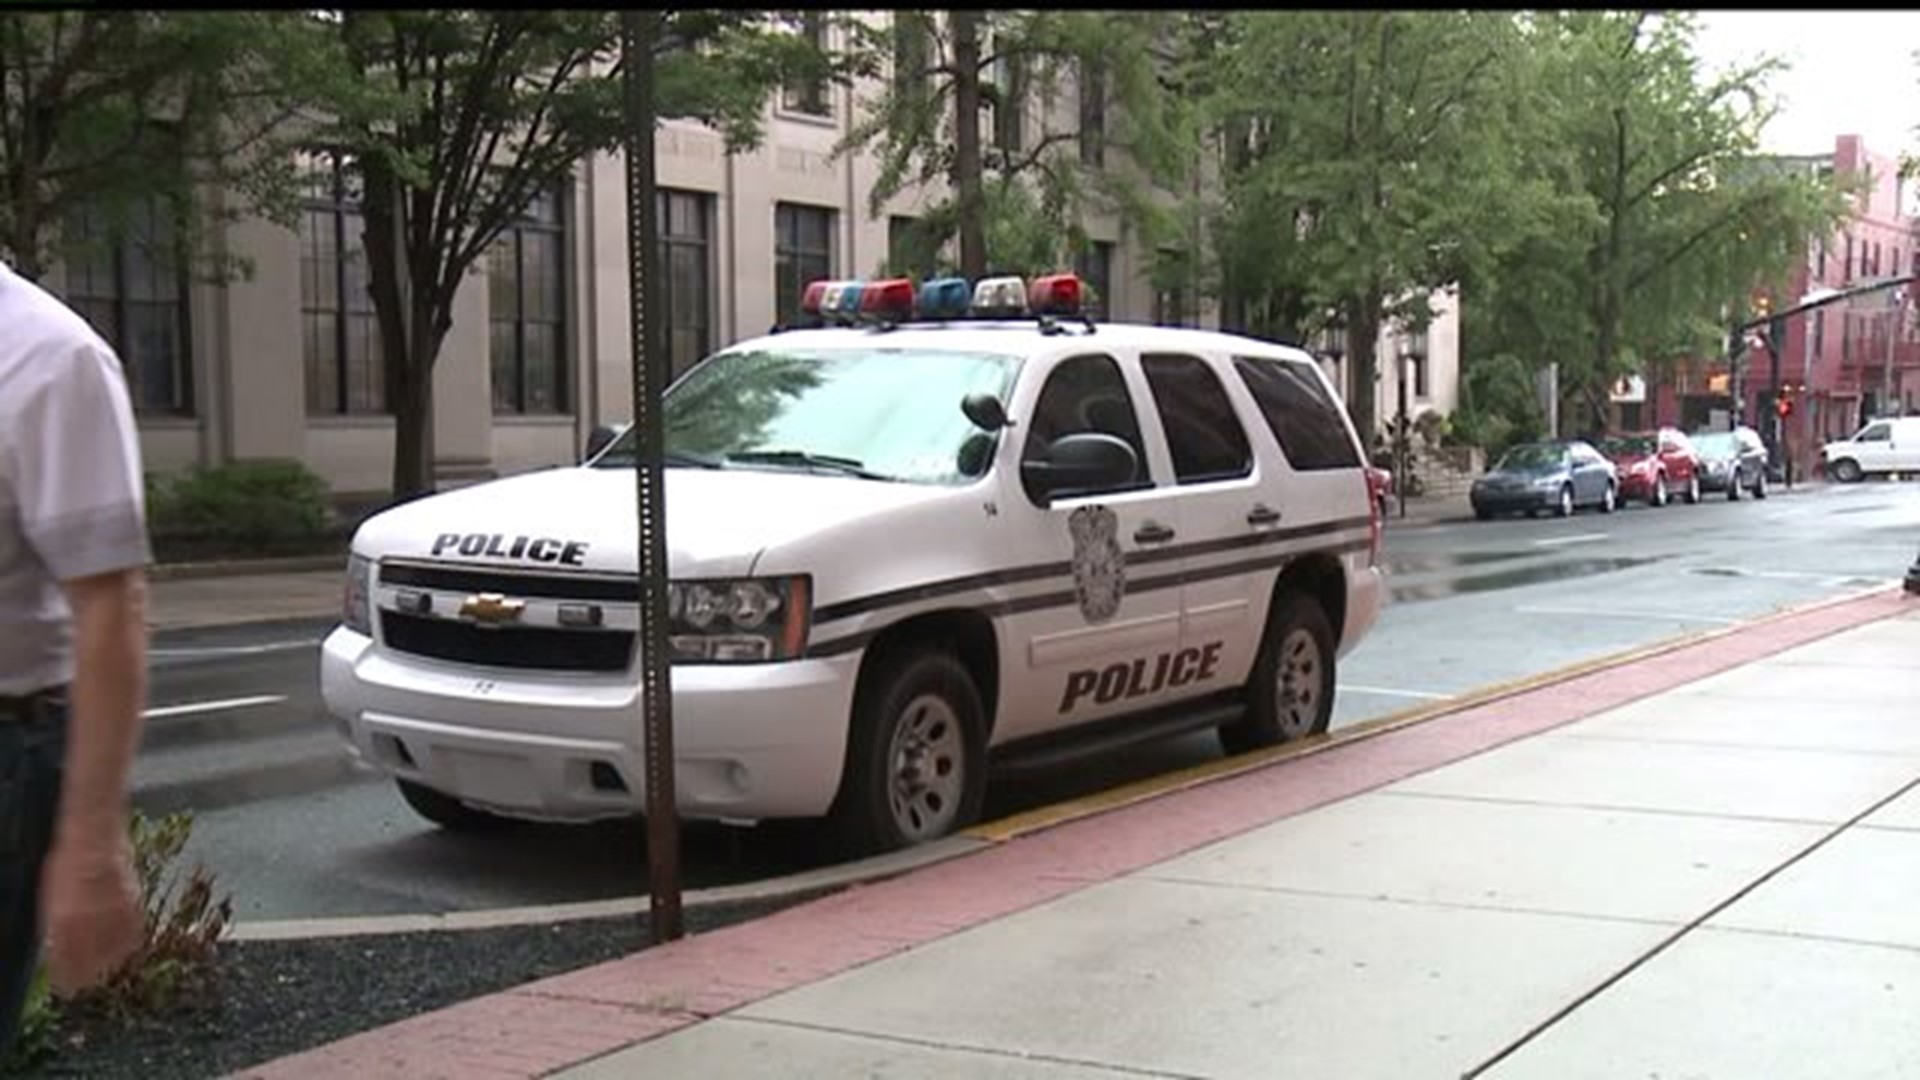 Central Pennsylvania law enforcement reacts to recent police shootings